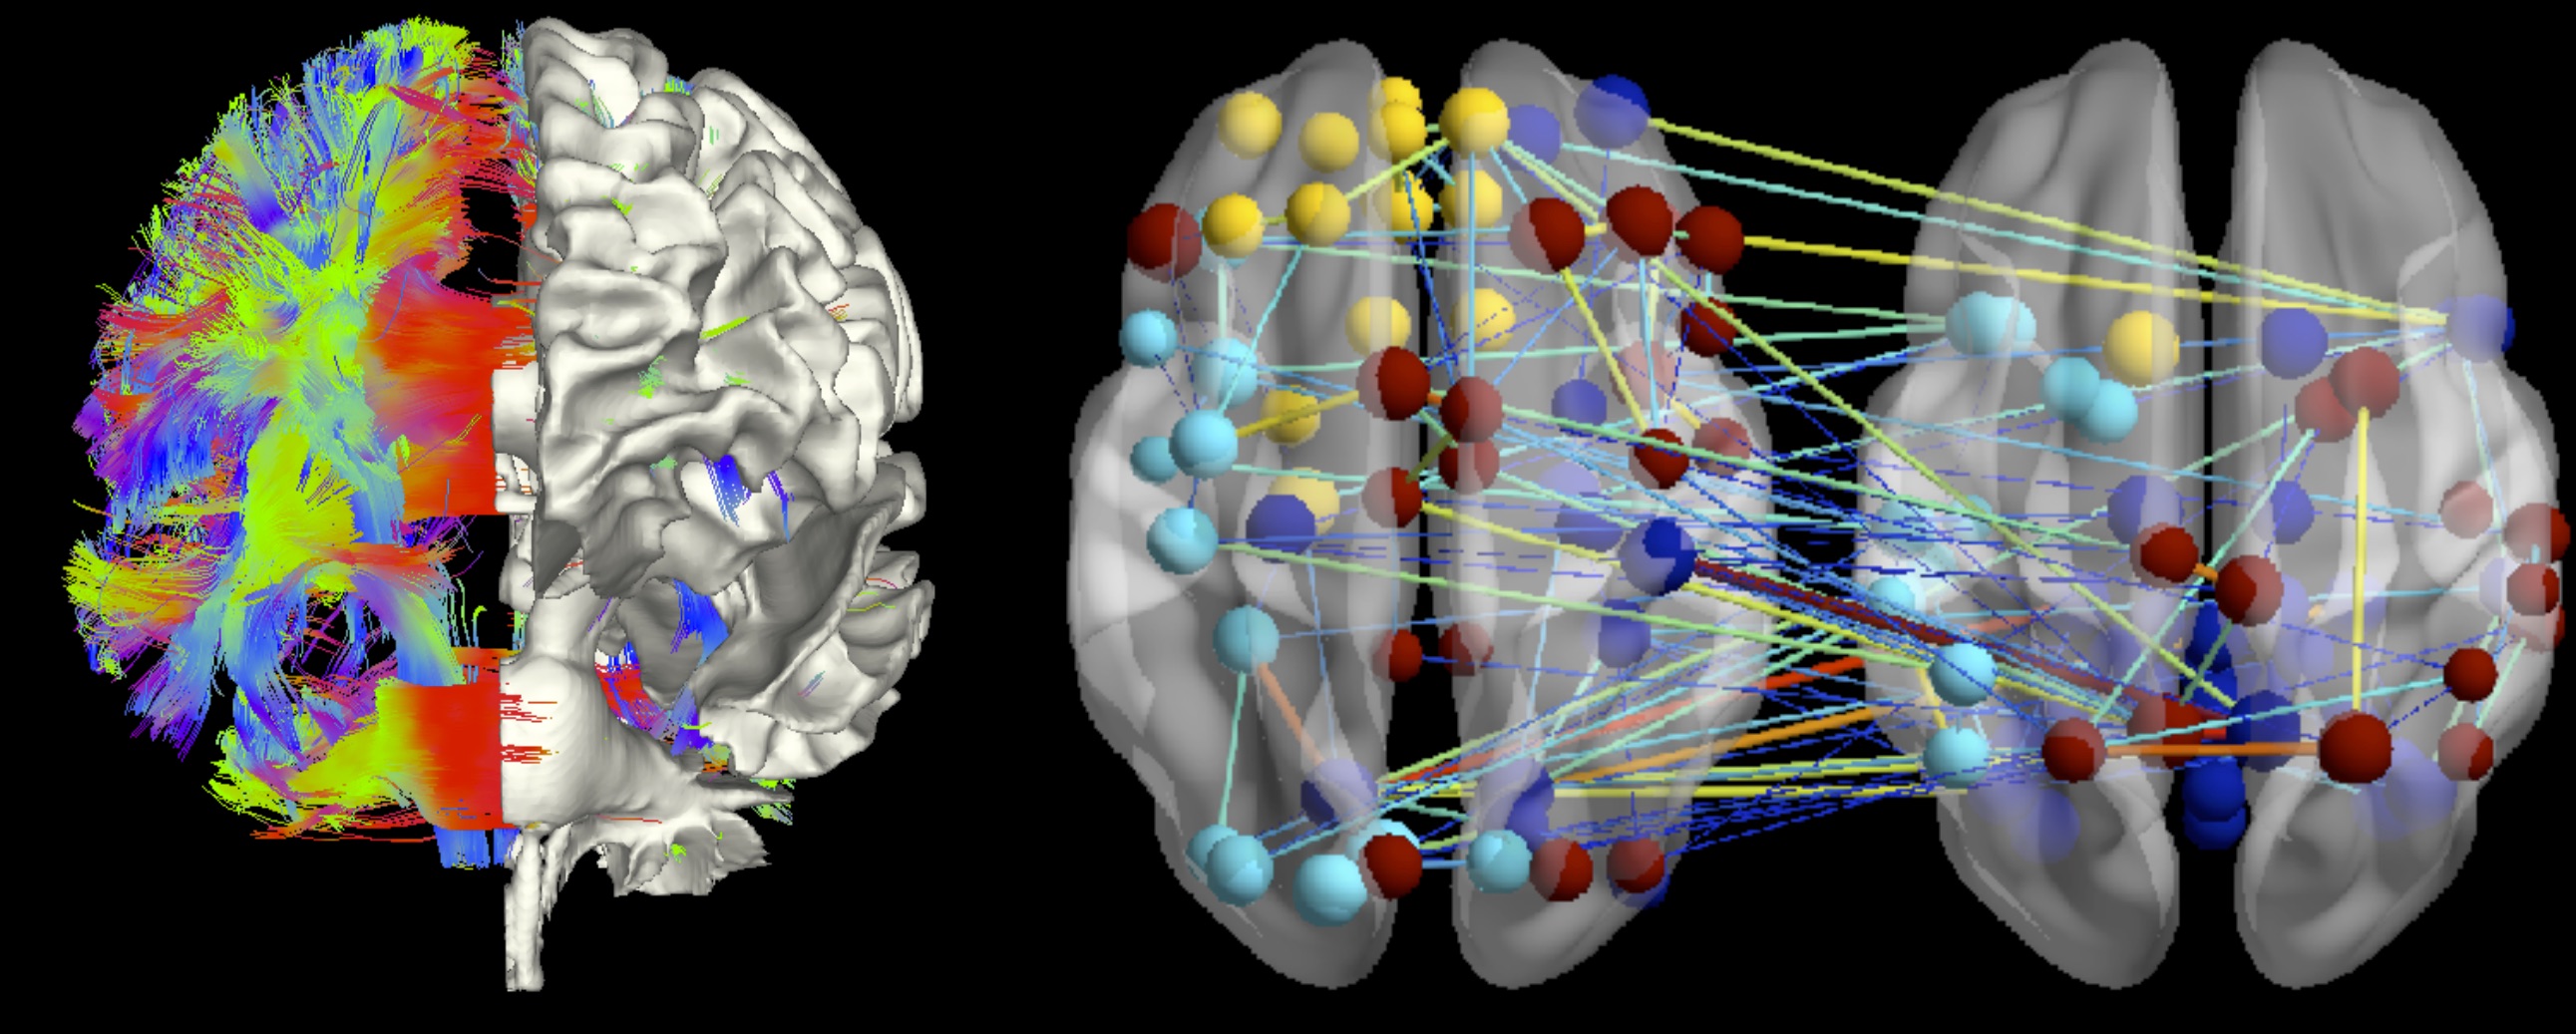 Networks in anatomical space: structural connectome, a graphical model of a brain network